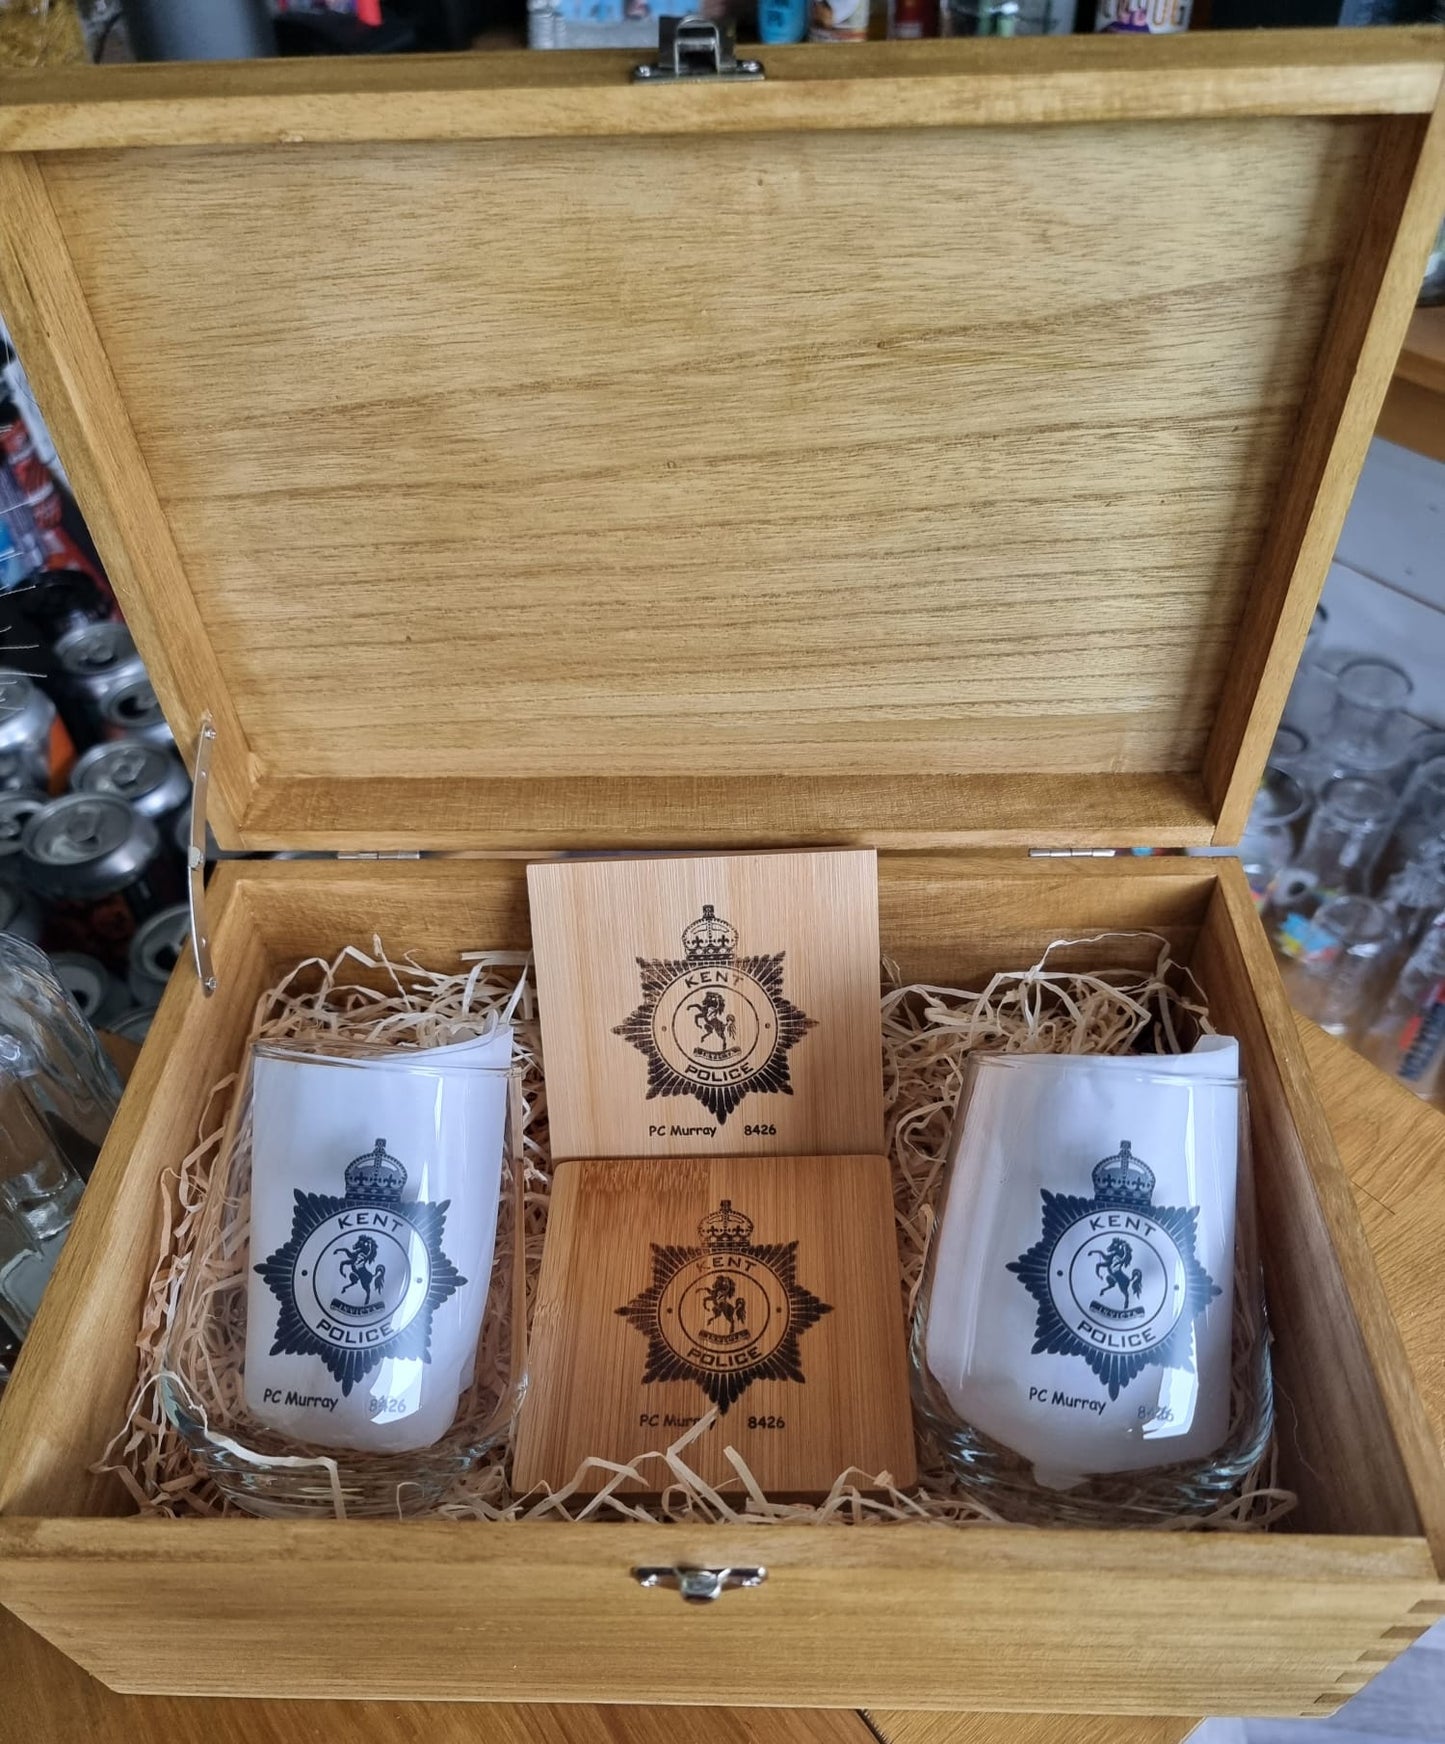 Personalised Retirement Gift Police Officer Force  / New Recruit Glass Gift Set Idea Set for Sergeant / Inspector 👮